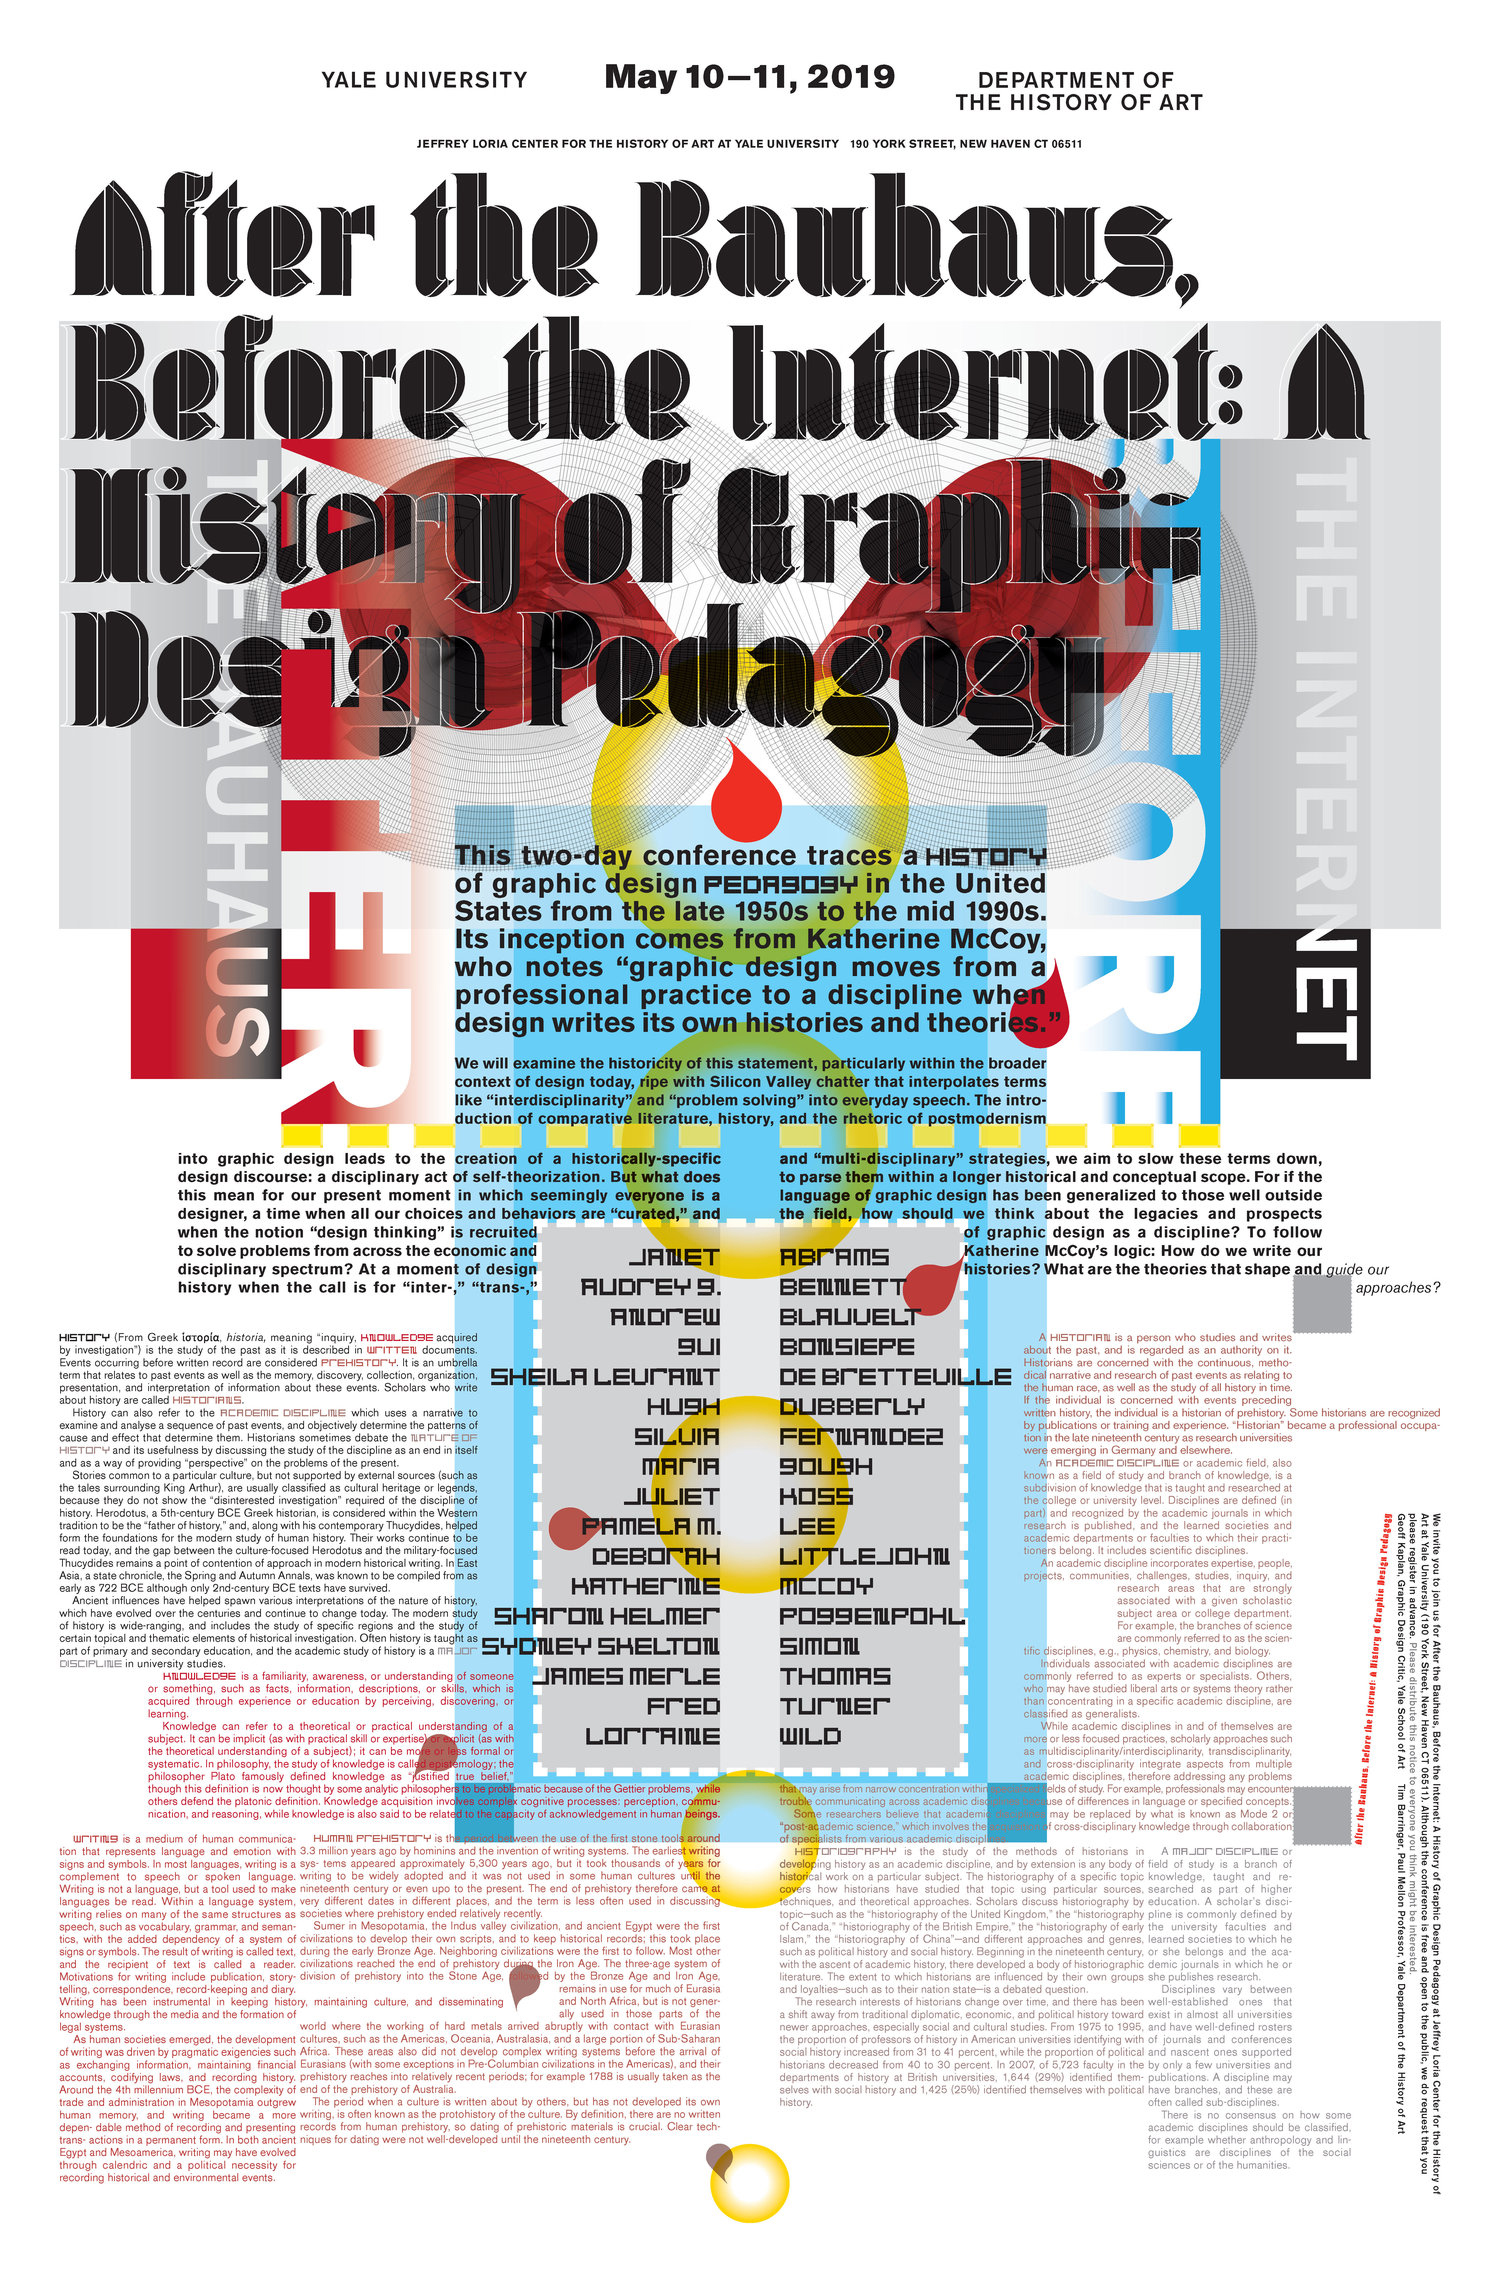 The conference program cover that uses type as a design element as well as blue, yellow, red and black shapes with the conference headline at the top in black type